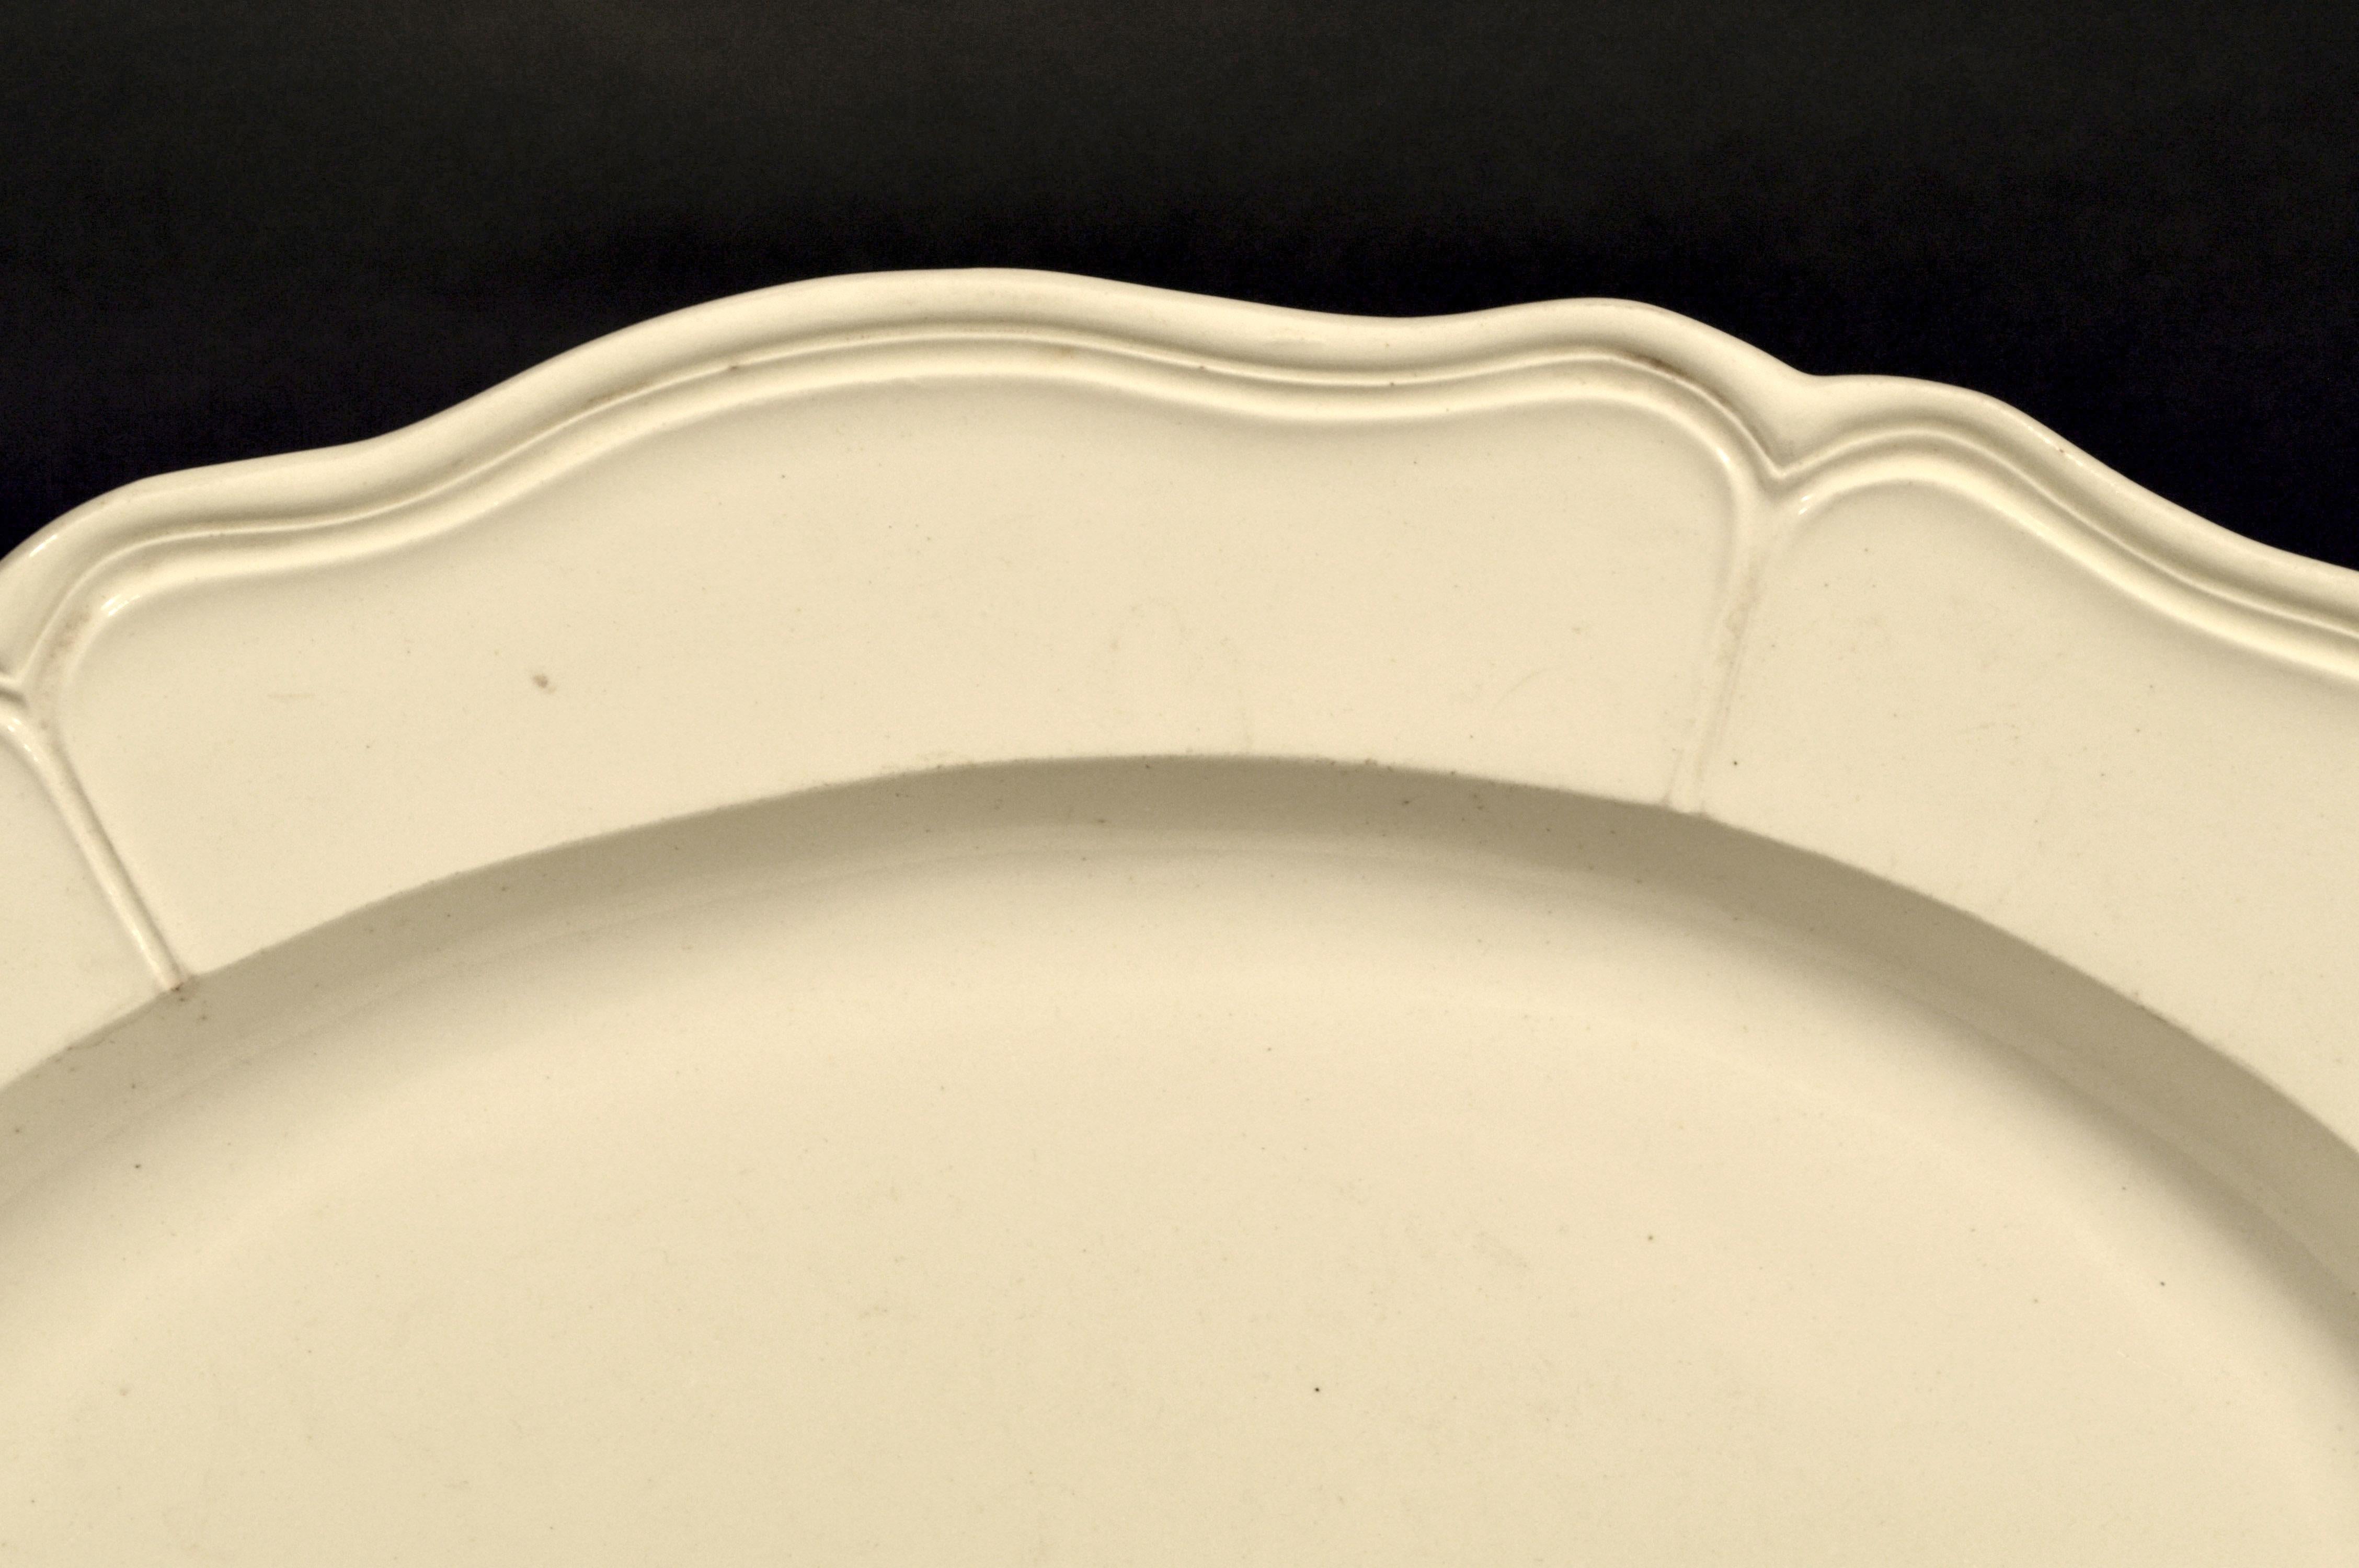 English plain creamware large oval dish,
circa 1770-1785

The large creamware dish has a molded rim with six shaped panels and a slightly raised rim.

Dimensions: 16 1/2 inches x 13 inches x 1 1/2 inches high.